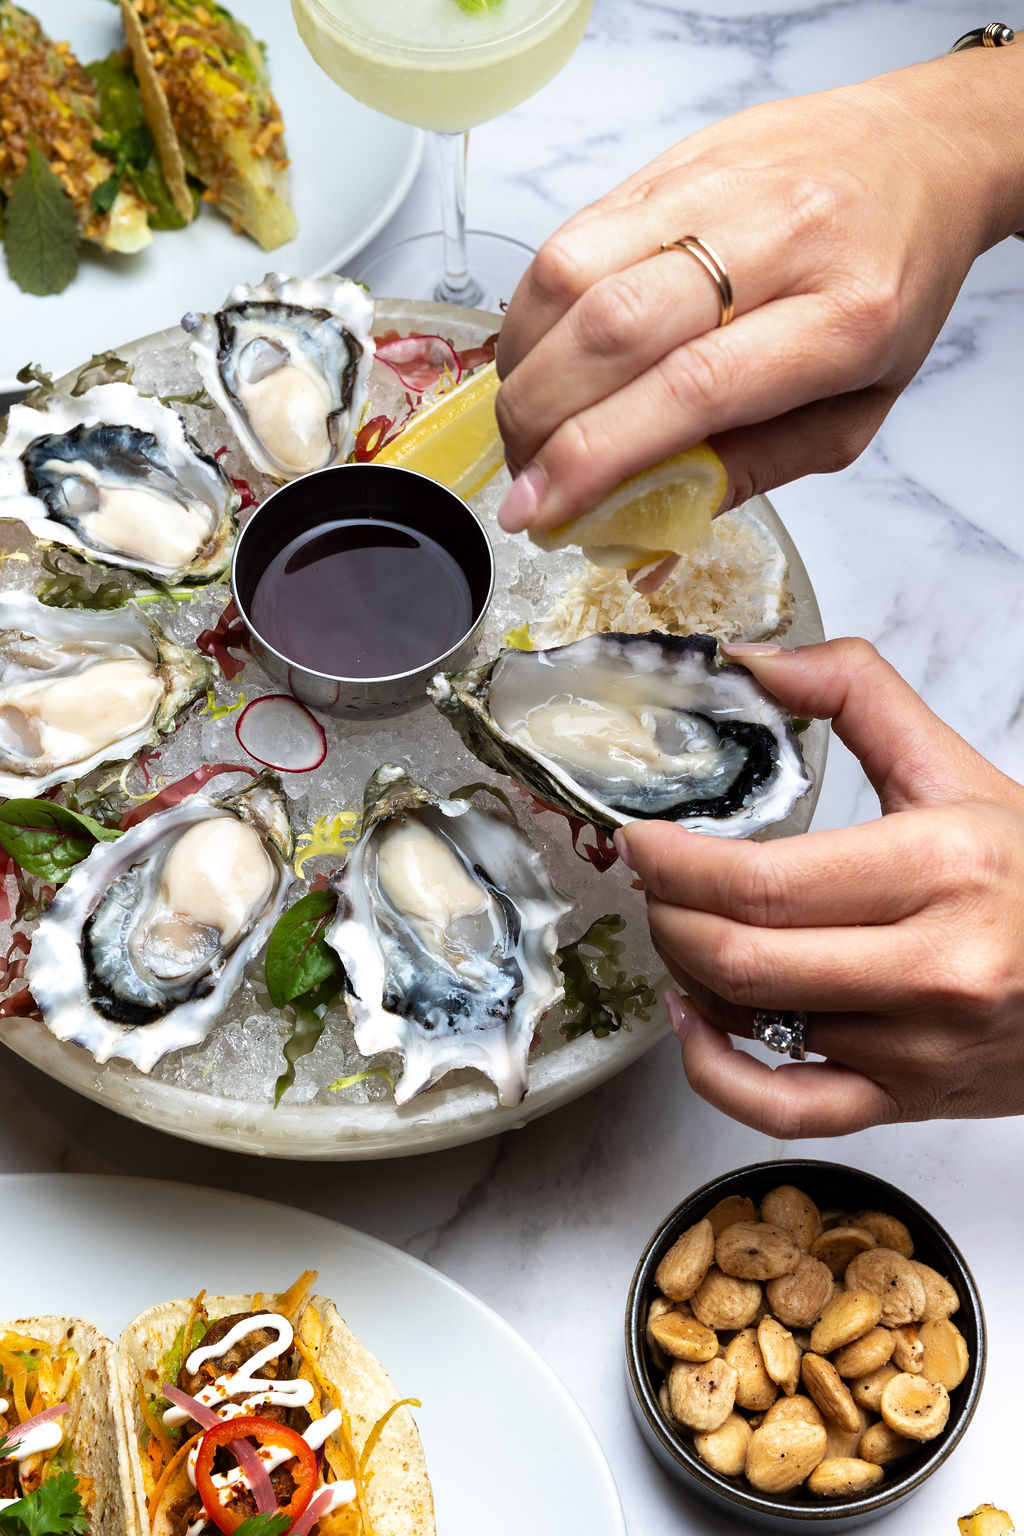 Oyster happy hour deal in Vancouver, BC at top seafood restaurant Boulevard Kitchen and Oyster Bar